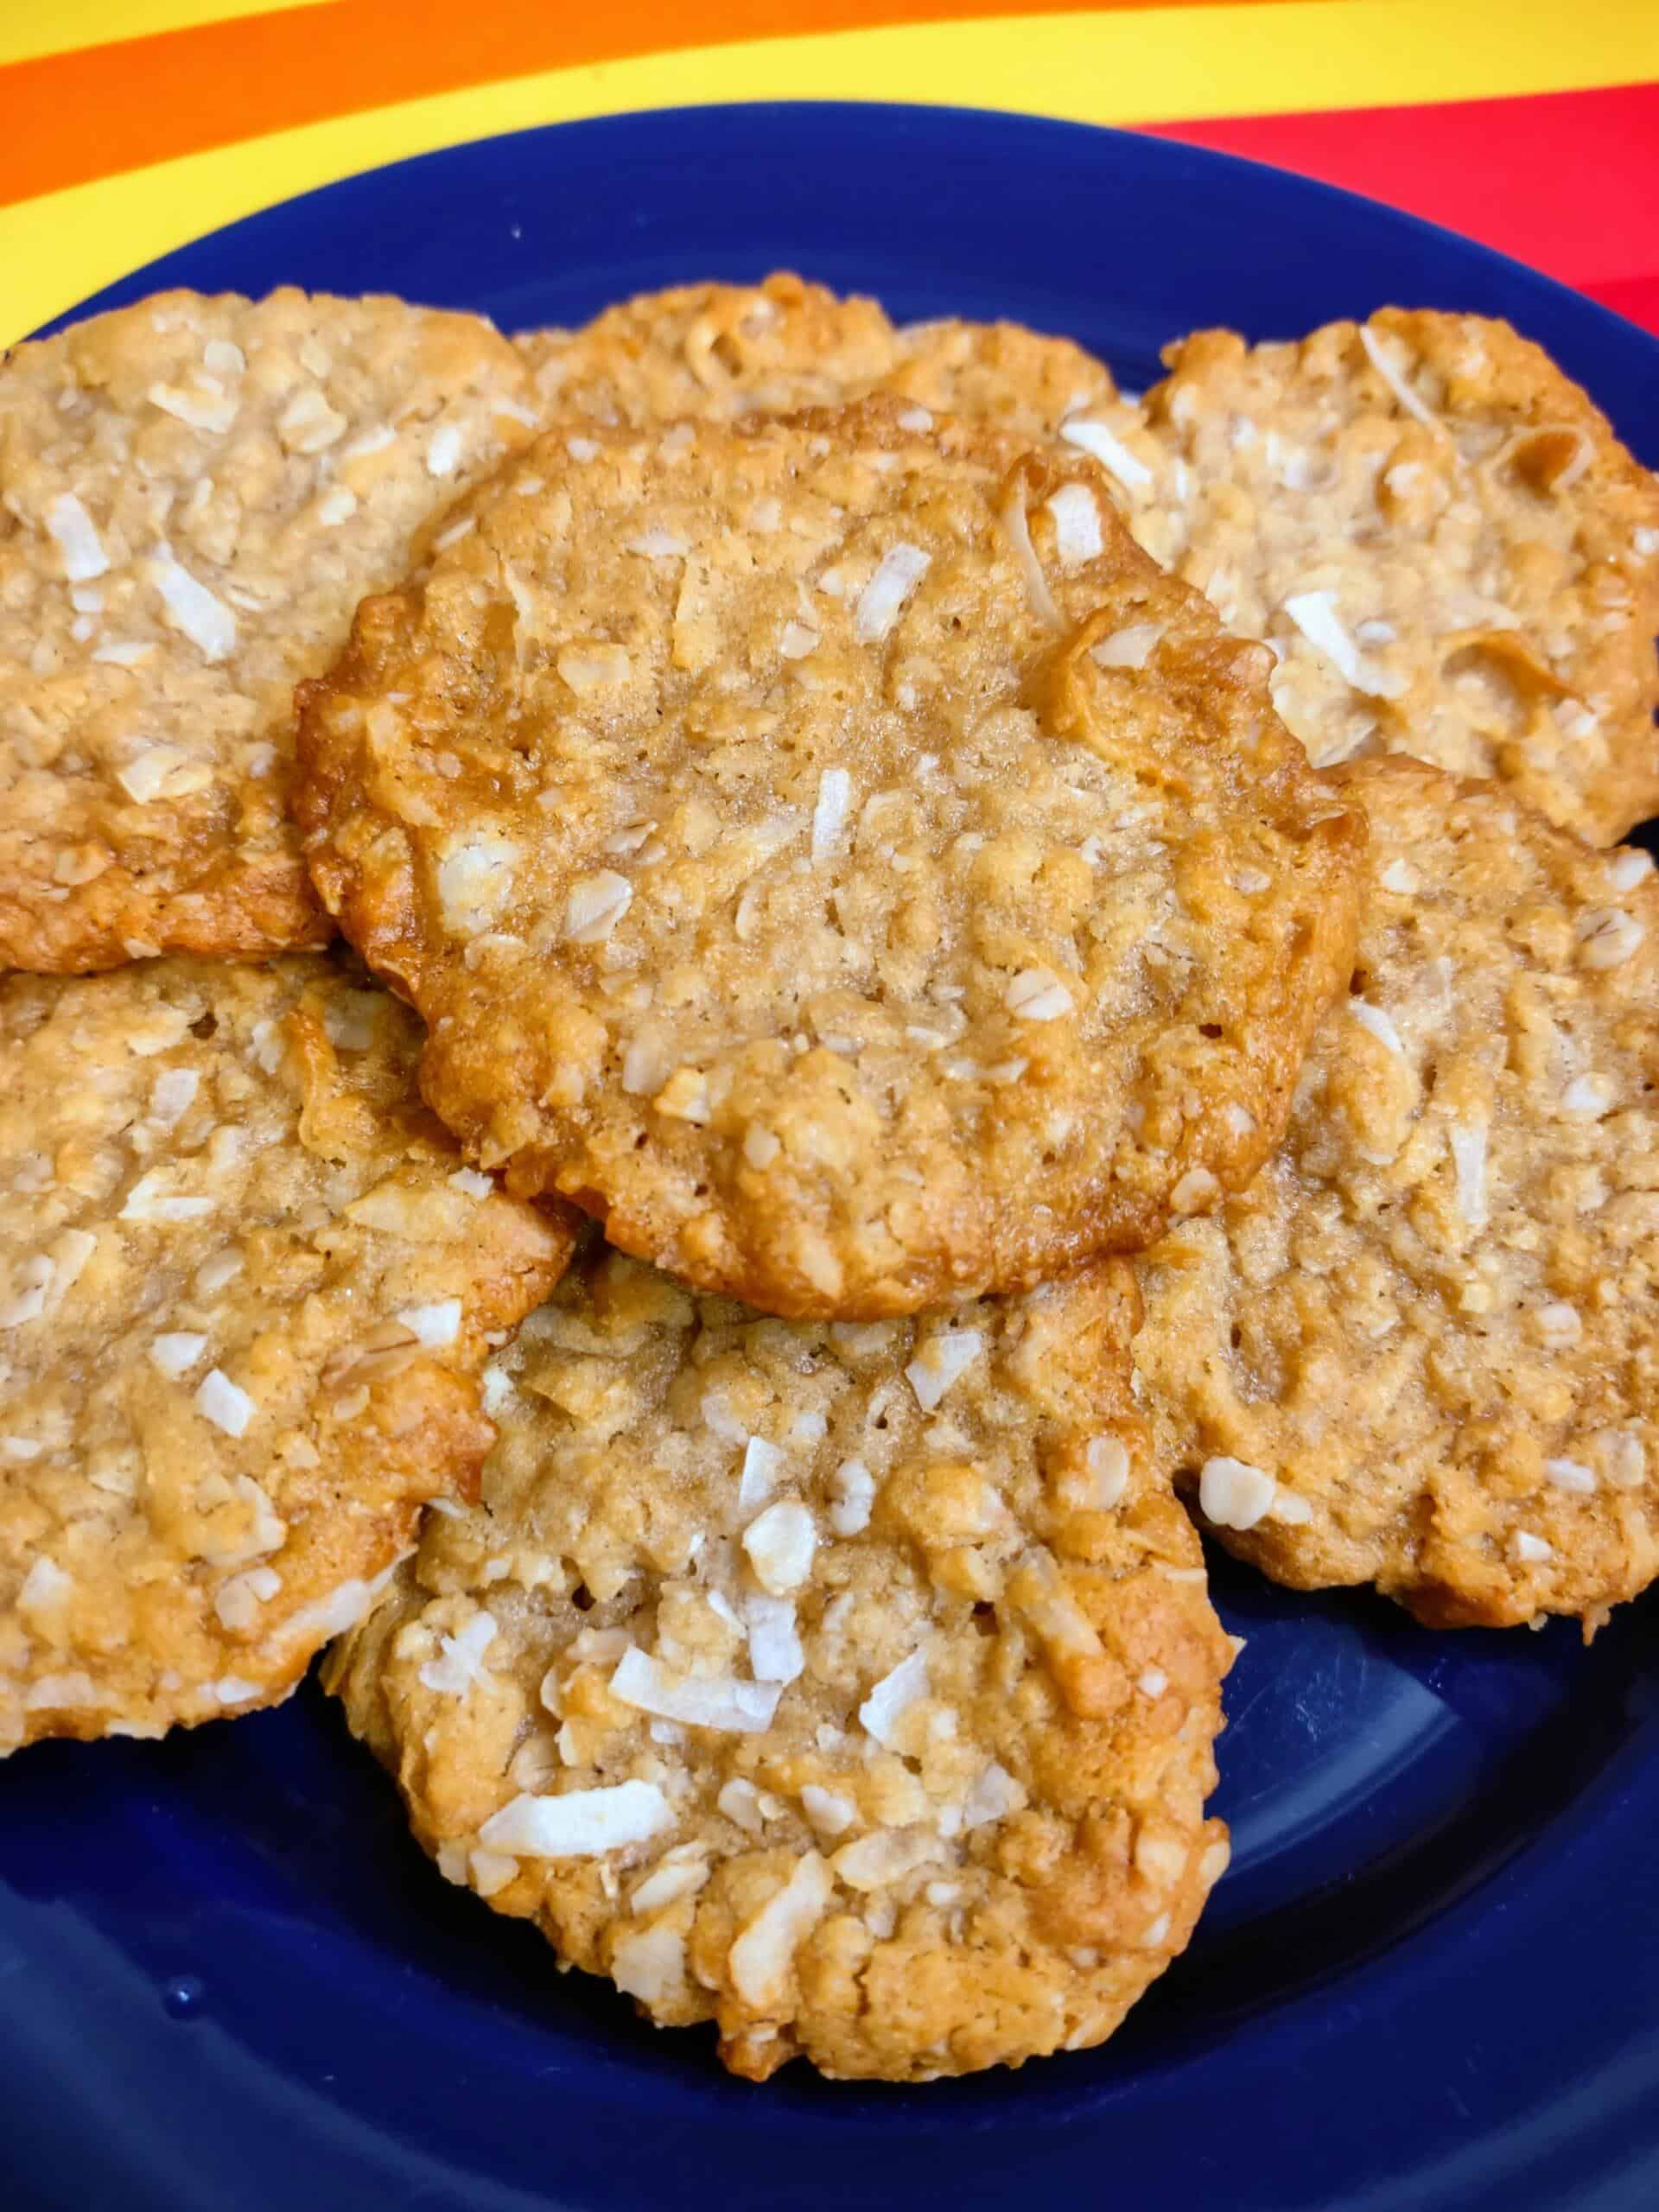 Traditional Anzac Biscuits,traditional anzac biscuits recipe chewy,traditional anzac biscuits recipe crunchy,traditional anzac biscuits recipe nz,how to make traditional anzac biscuits